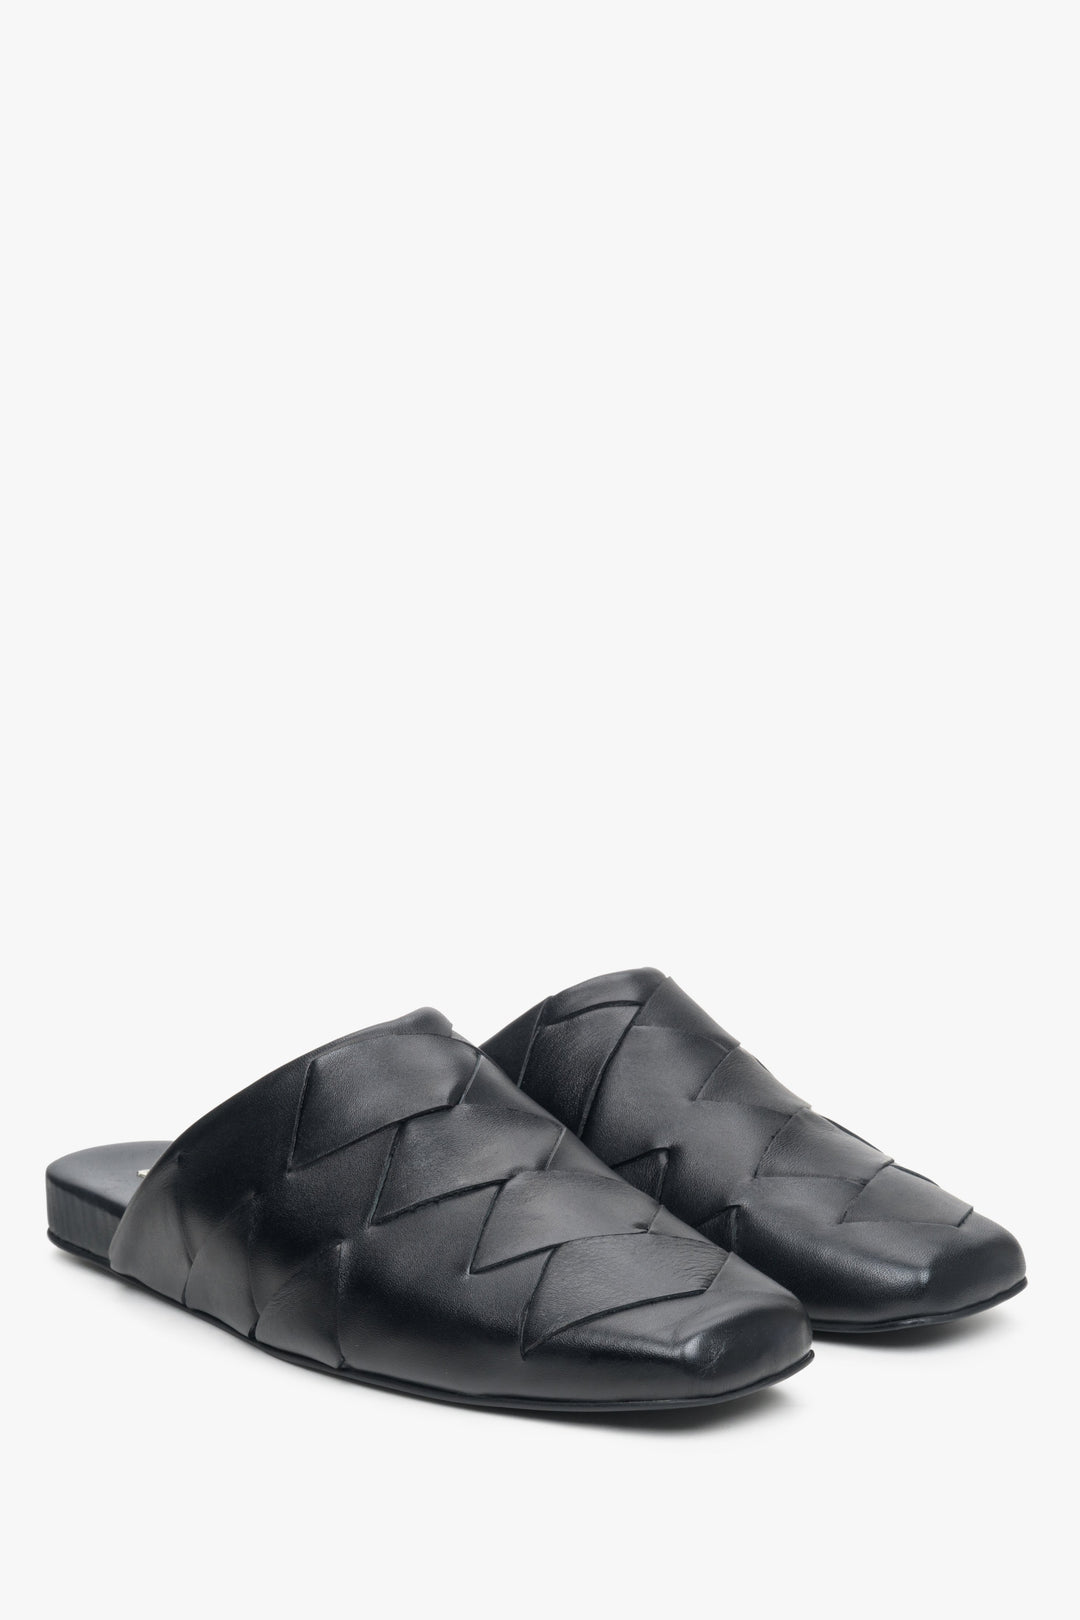 Women's black leather slides with a covered toe line.